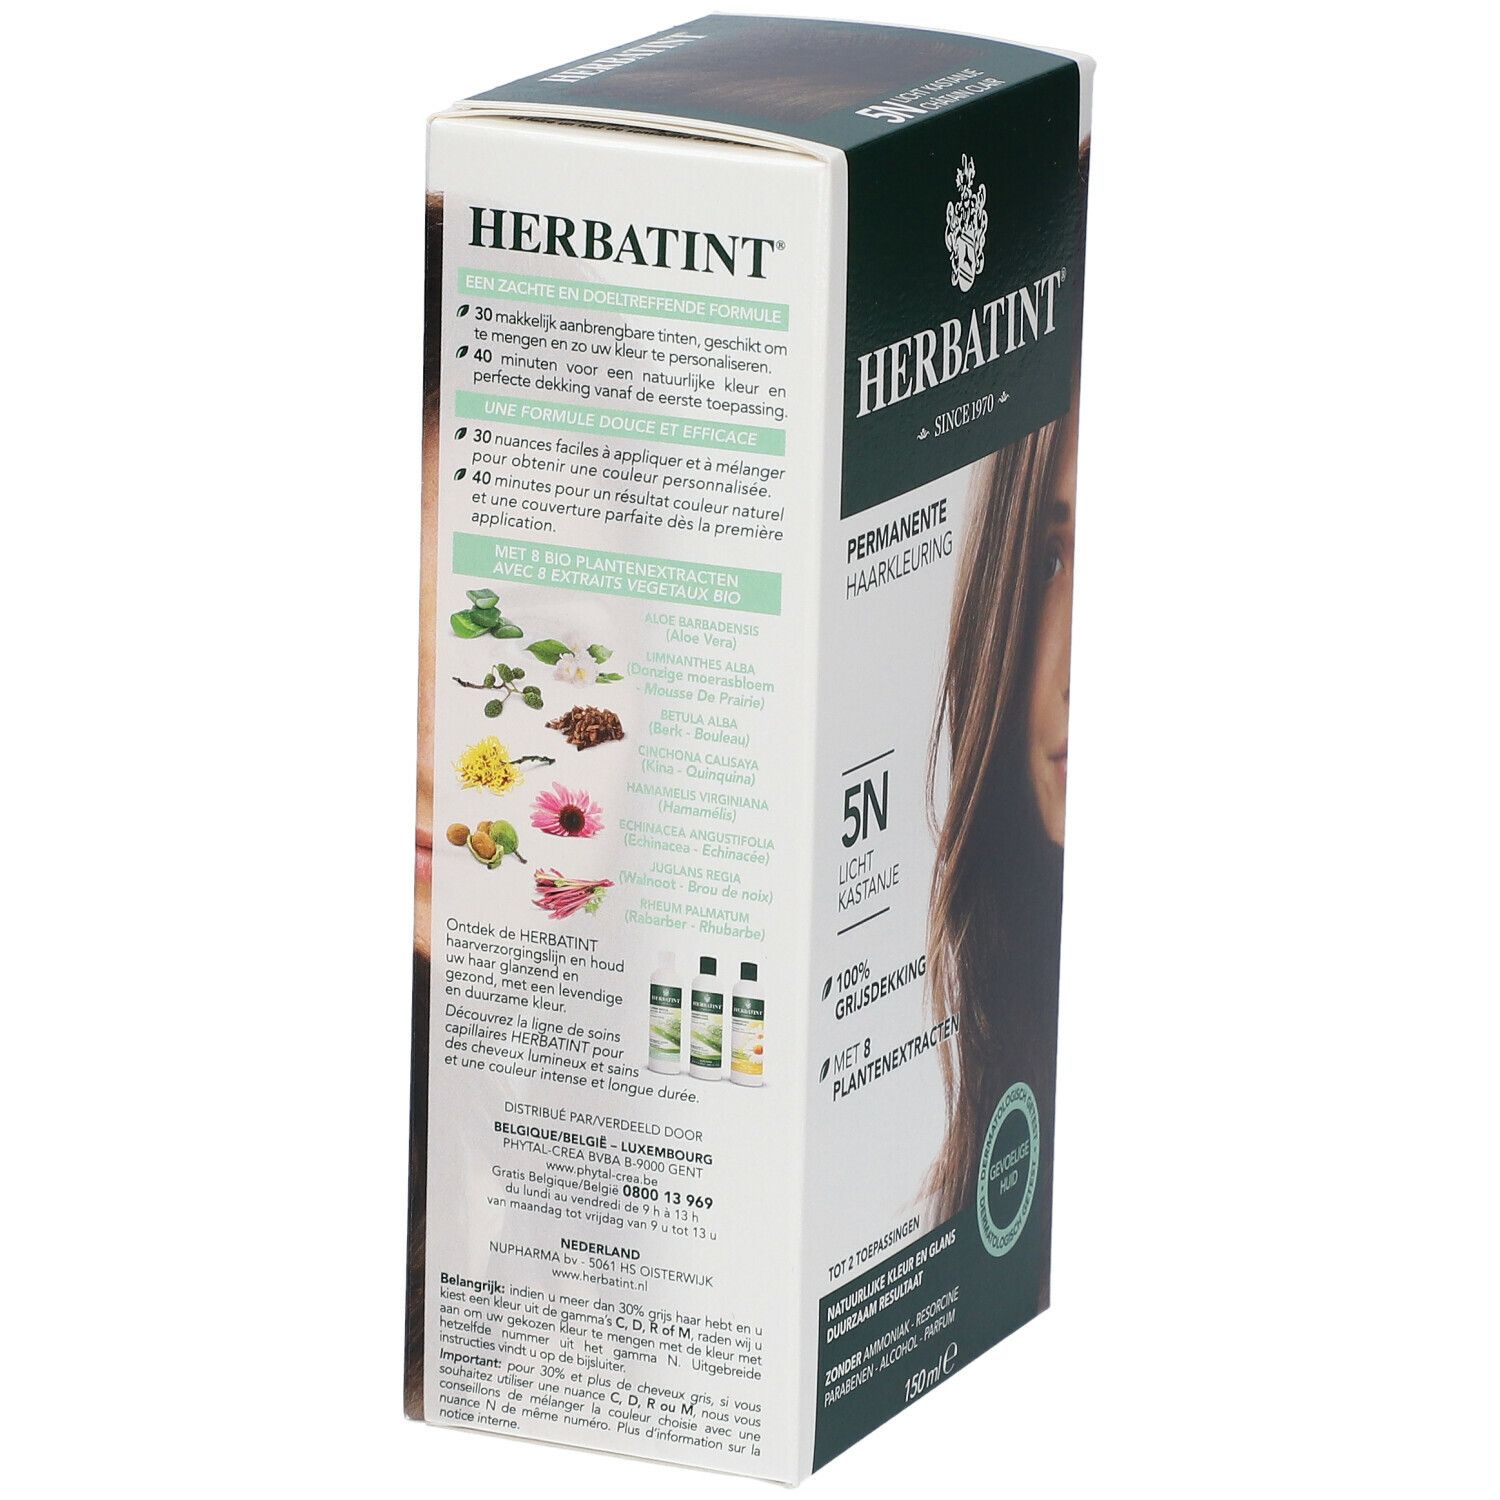 Herbatint Soin colorant permanent Châtain clair 5N